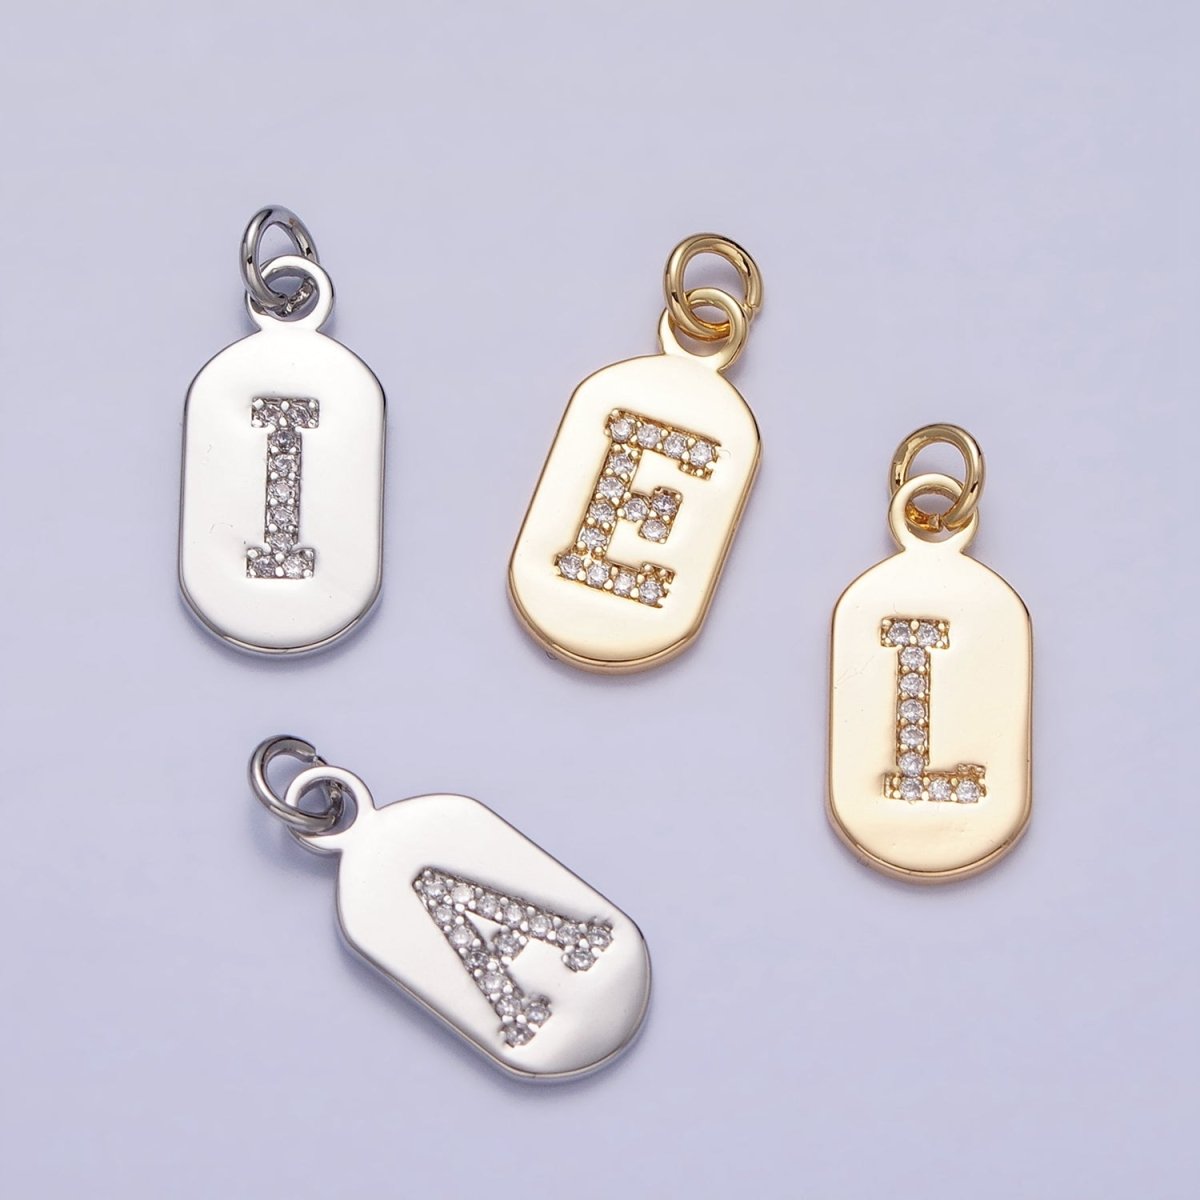 Silver Rectangular Tag CZ Clear Micro Paved Personalized Initial Alphabet Name Tag Charm | AD001-AD026 - DLUXCA